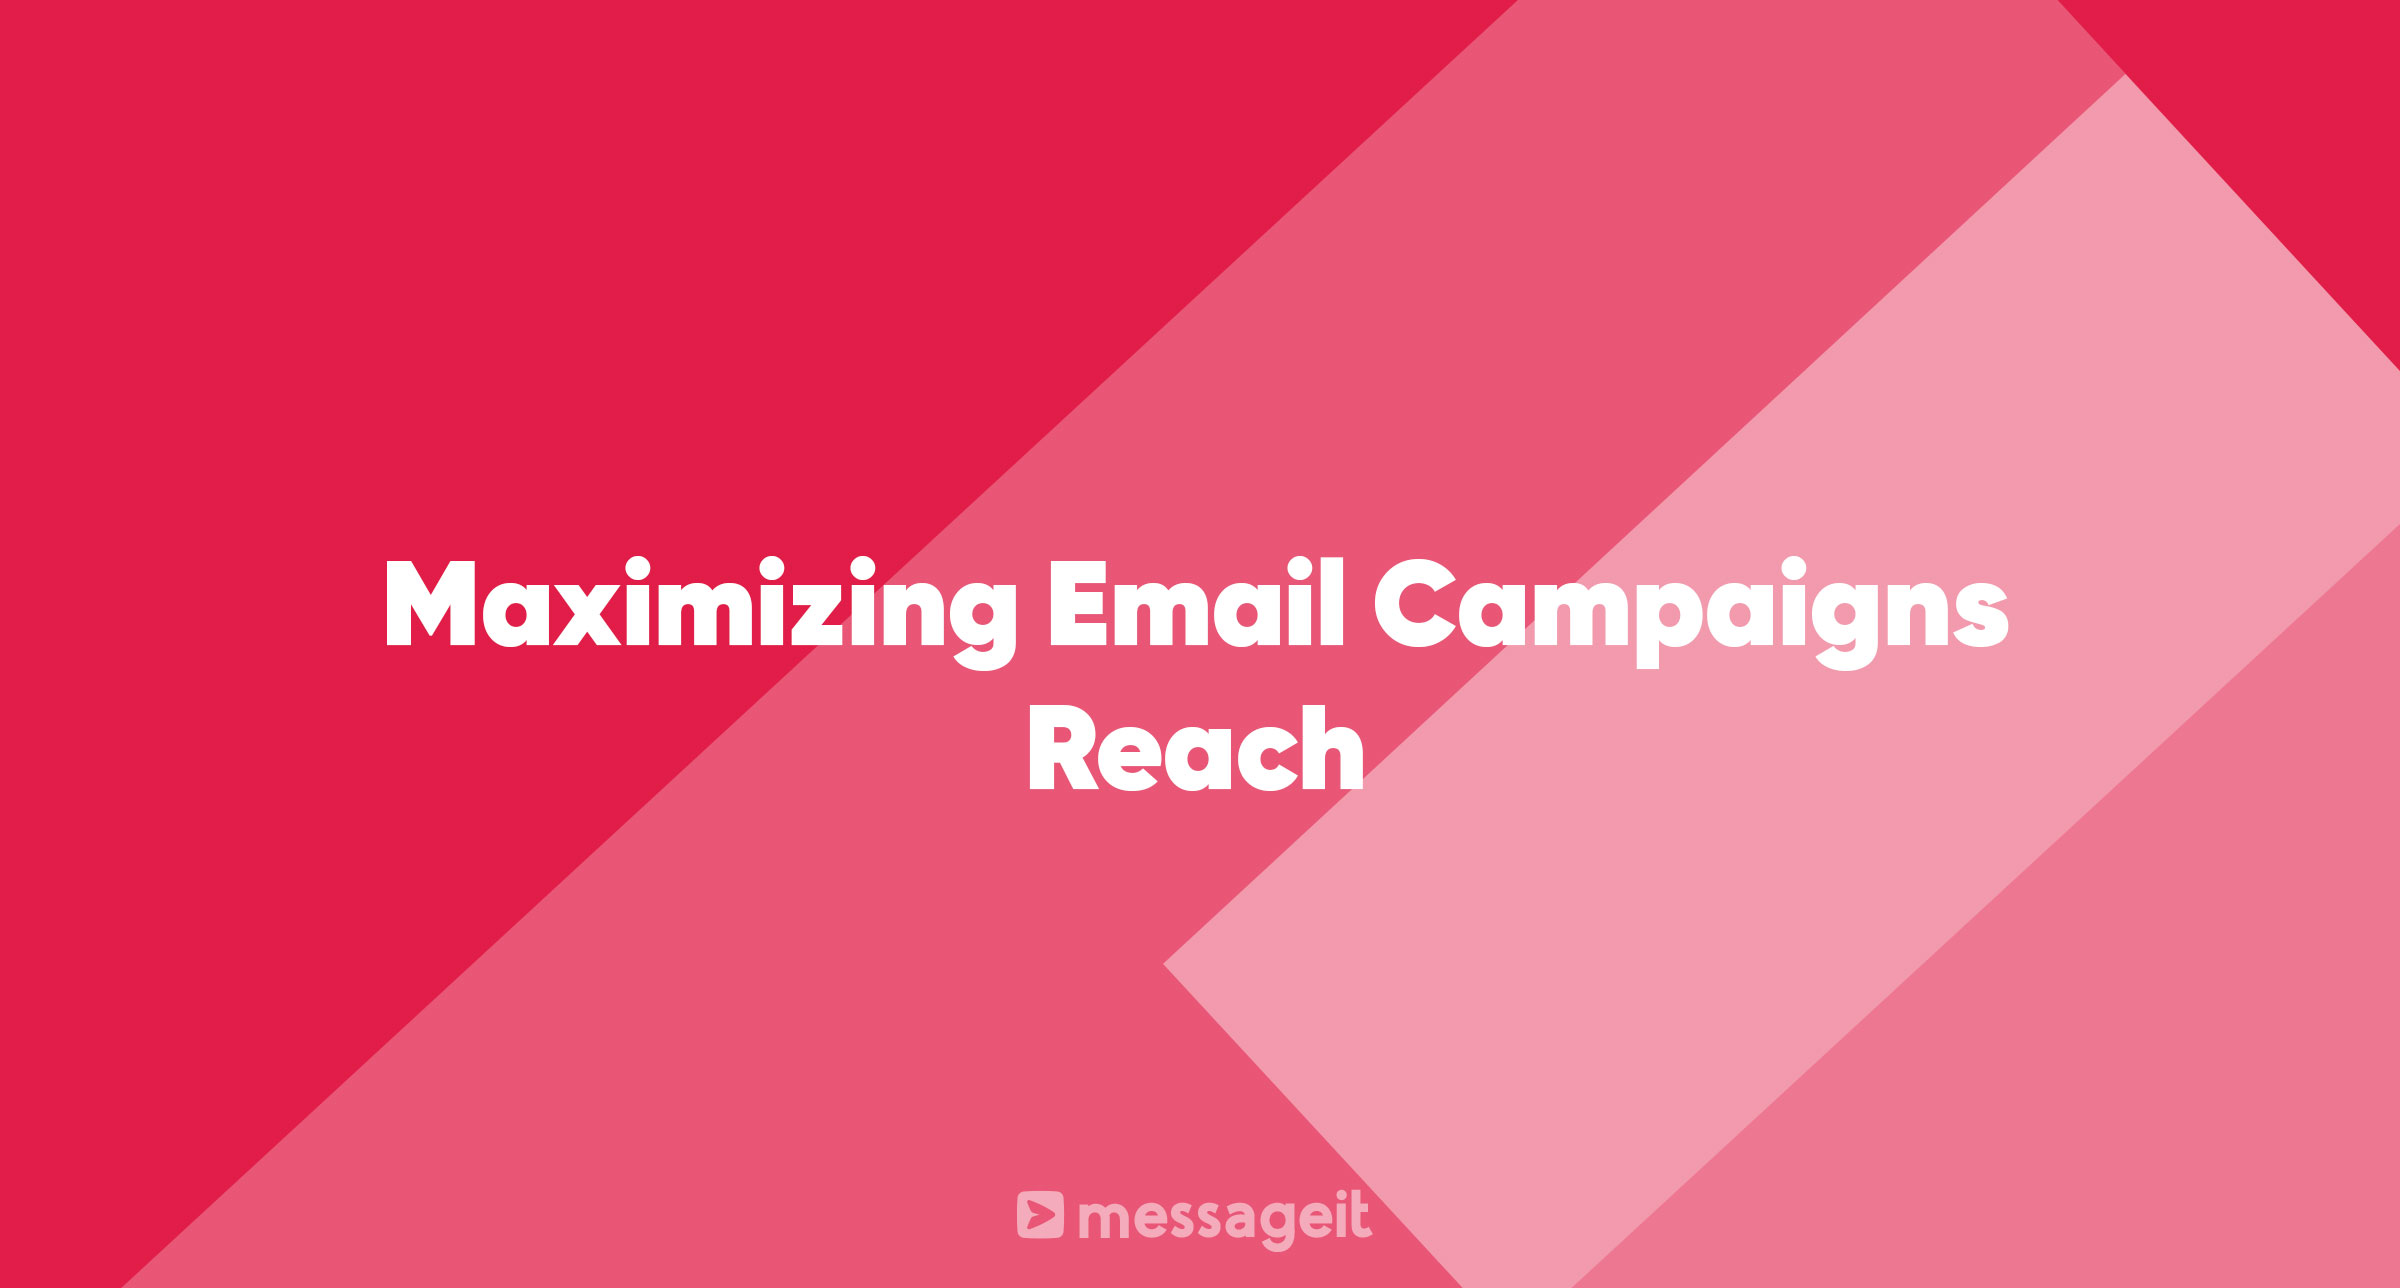 Article | Maximizing Email Campaigns Reach